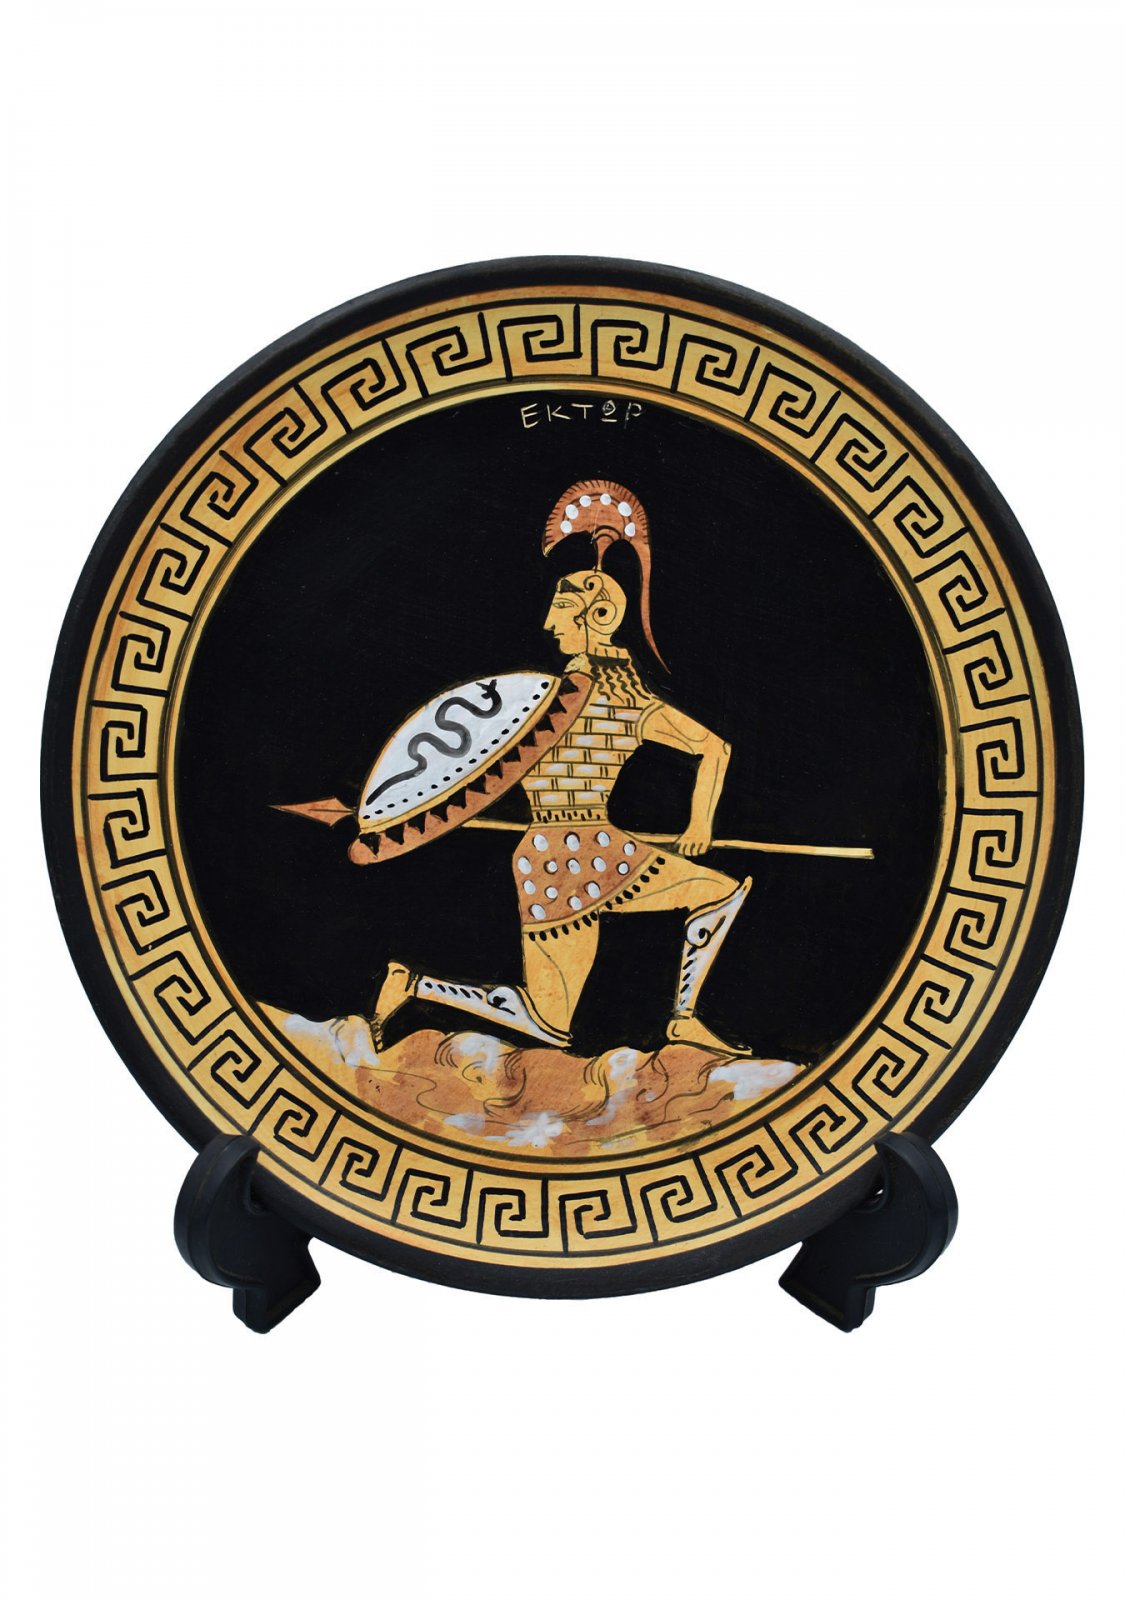 Greek ceramic plate depicting Hector, prince and warrior of Troy (28cm)